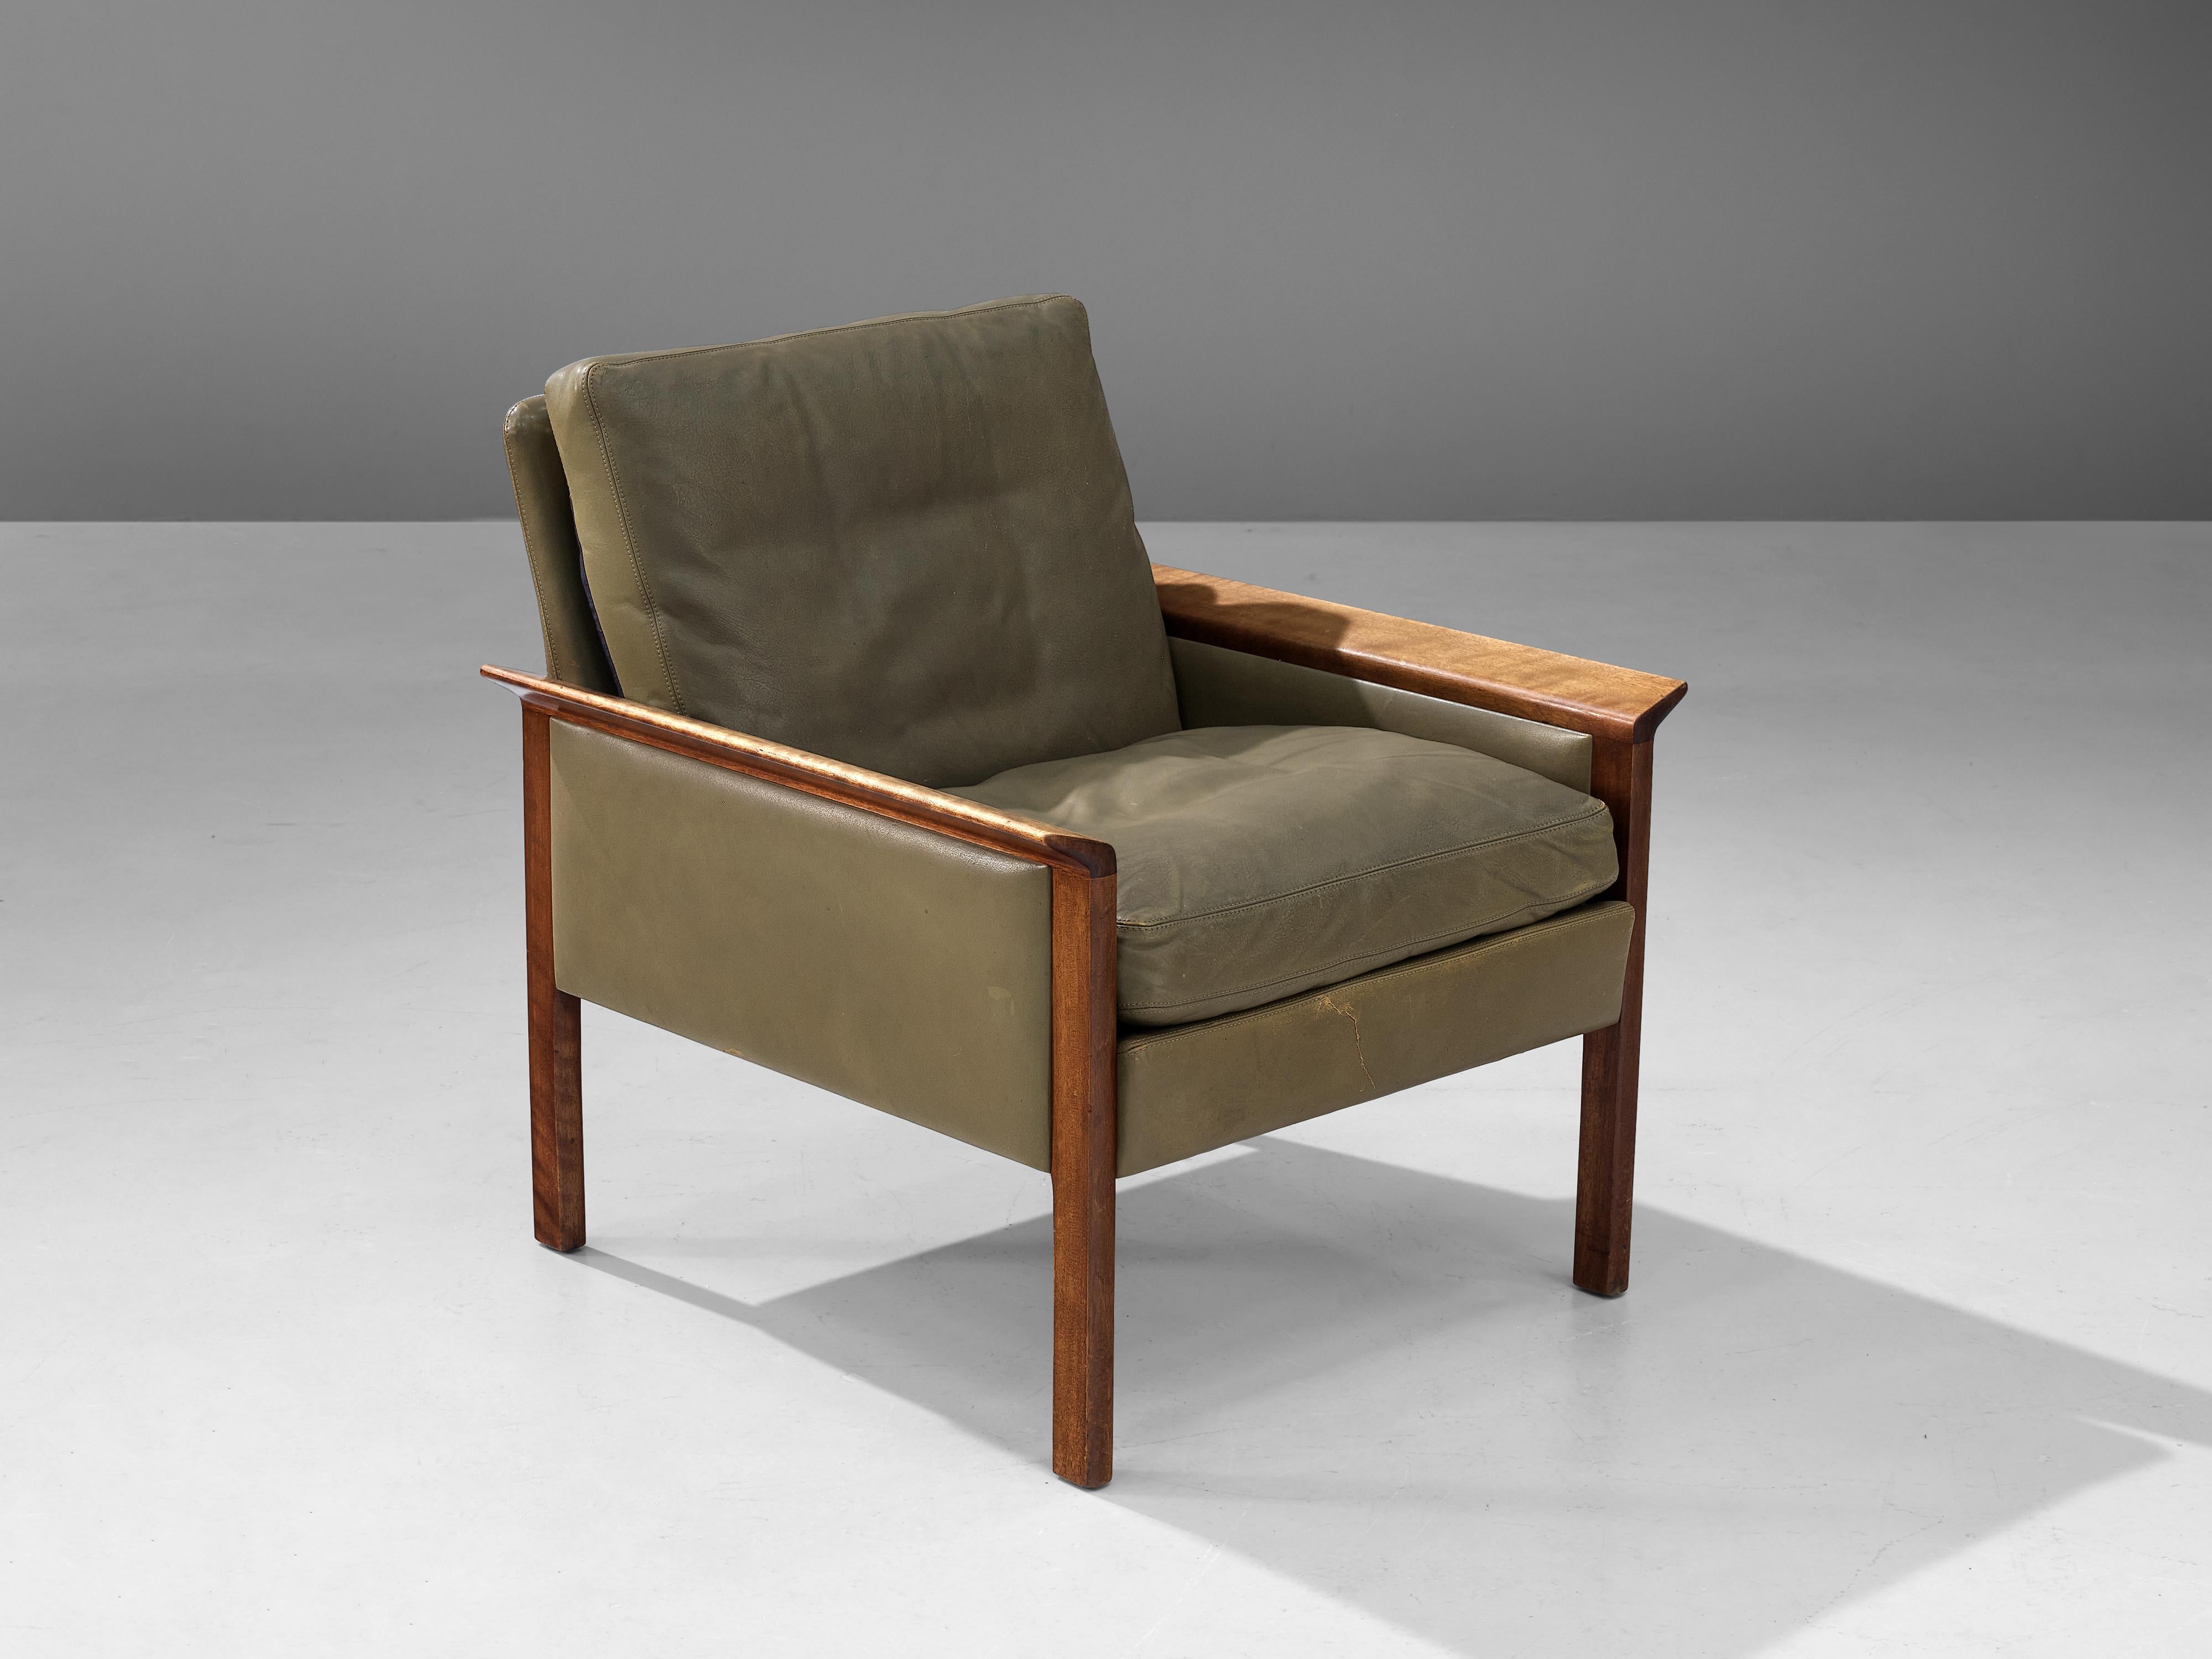 Mid-20th Century Hans Olsen for C/S Møbler Lounge Chair Model ‘400’ in Walnut and Leather